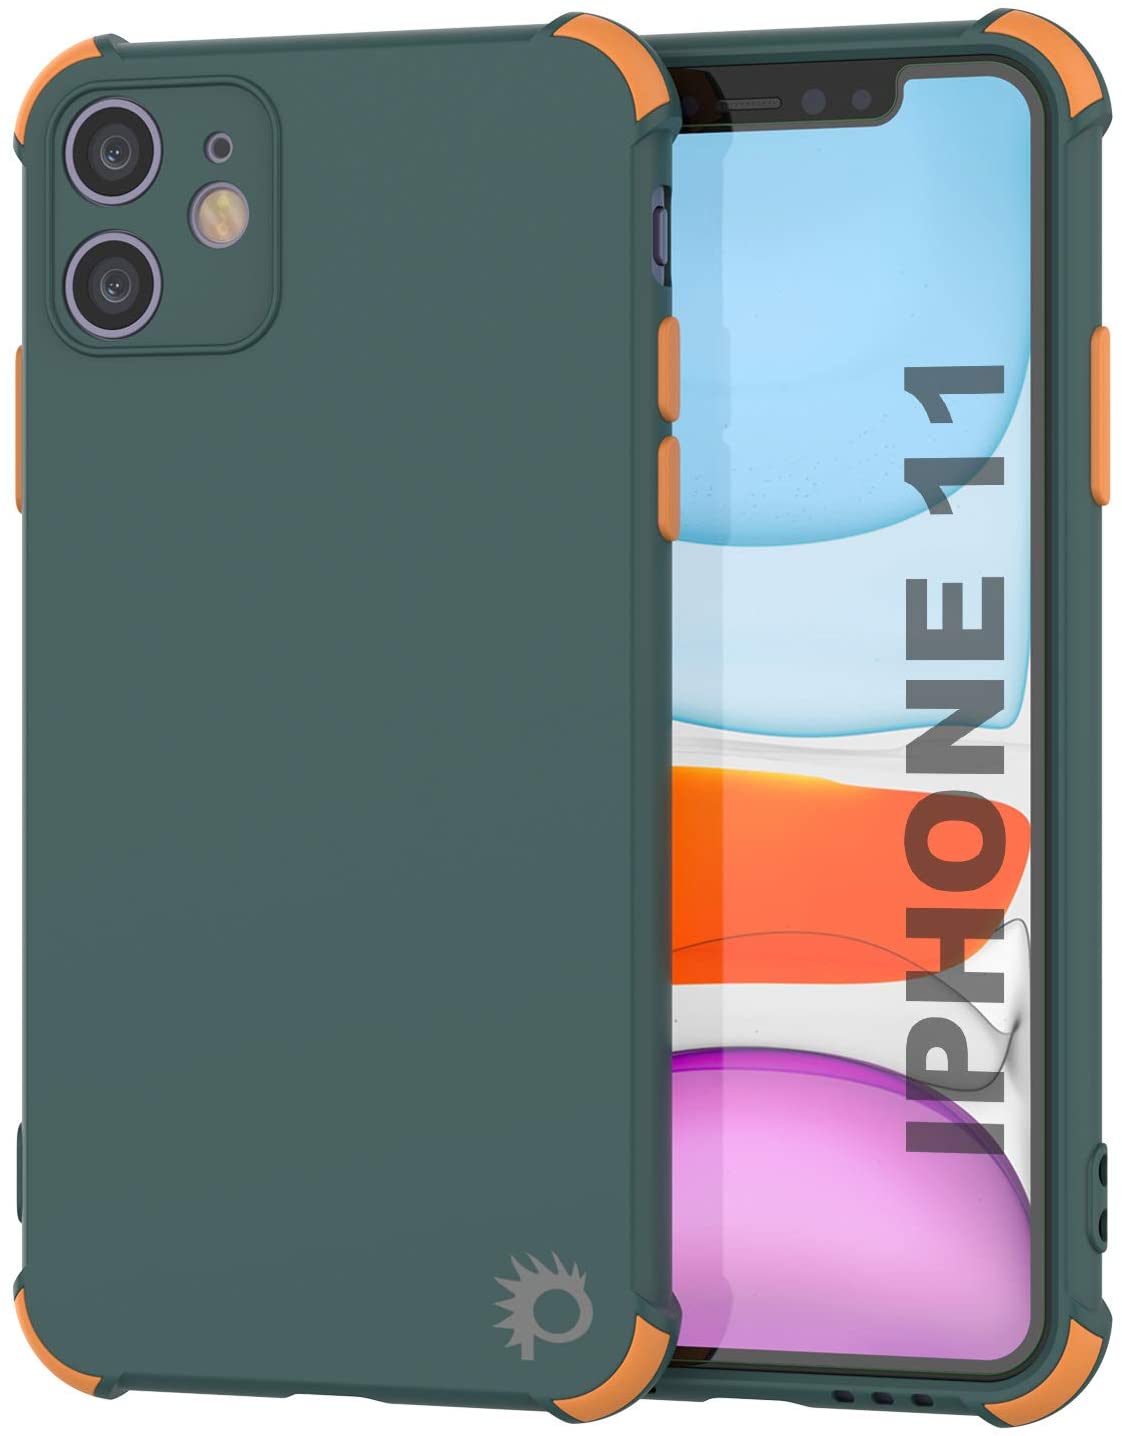 Punkcase Protective & Lightweight TPU Case [Sunshine Series] for iPhone 11 [Dark Green] (Color in image: Dark Green)